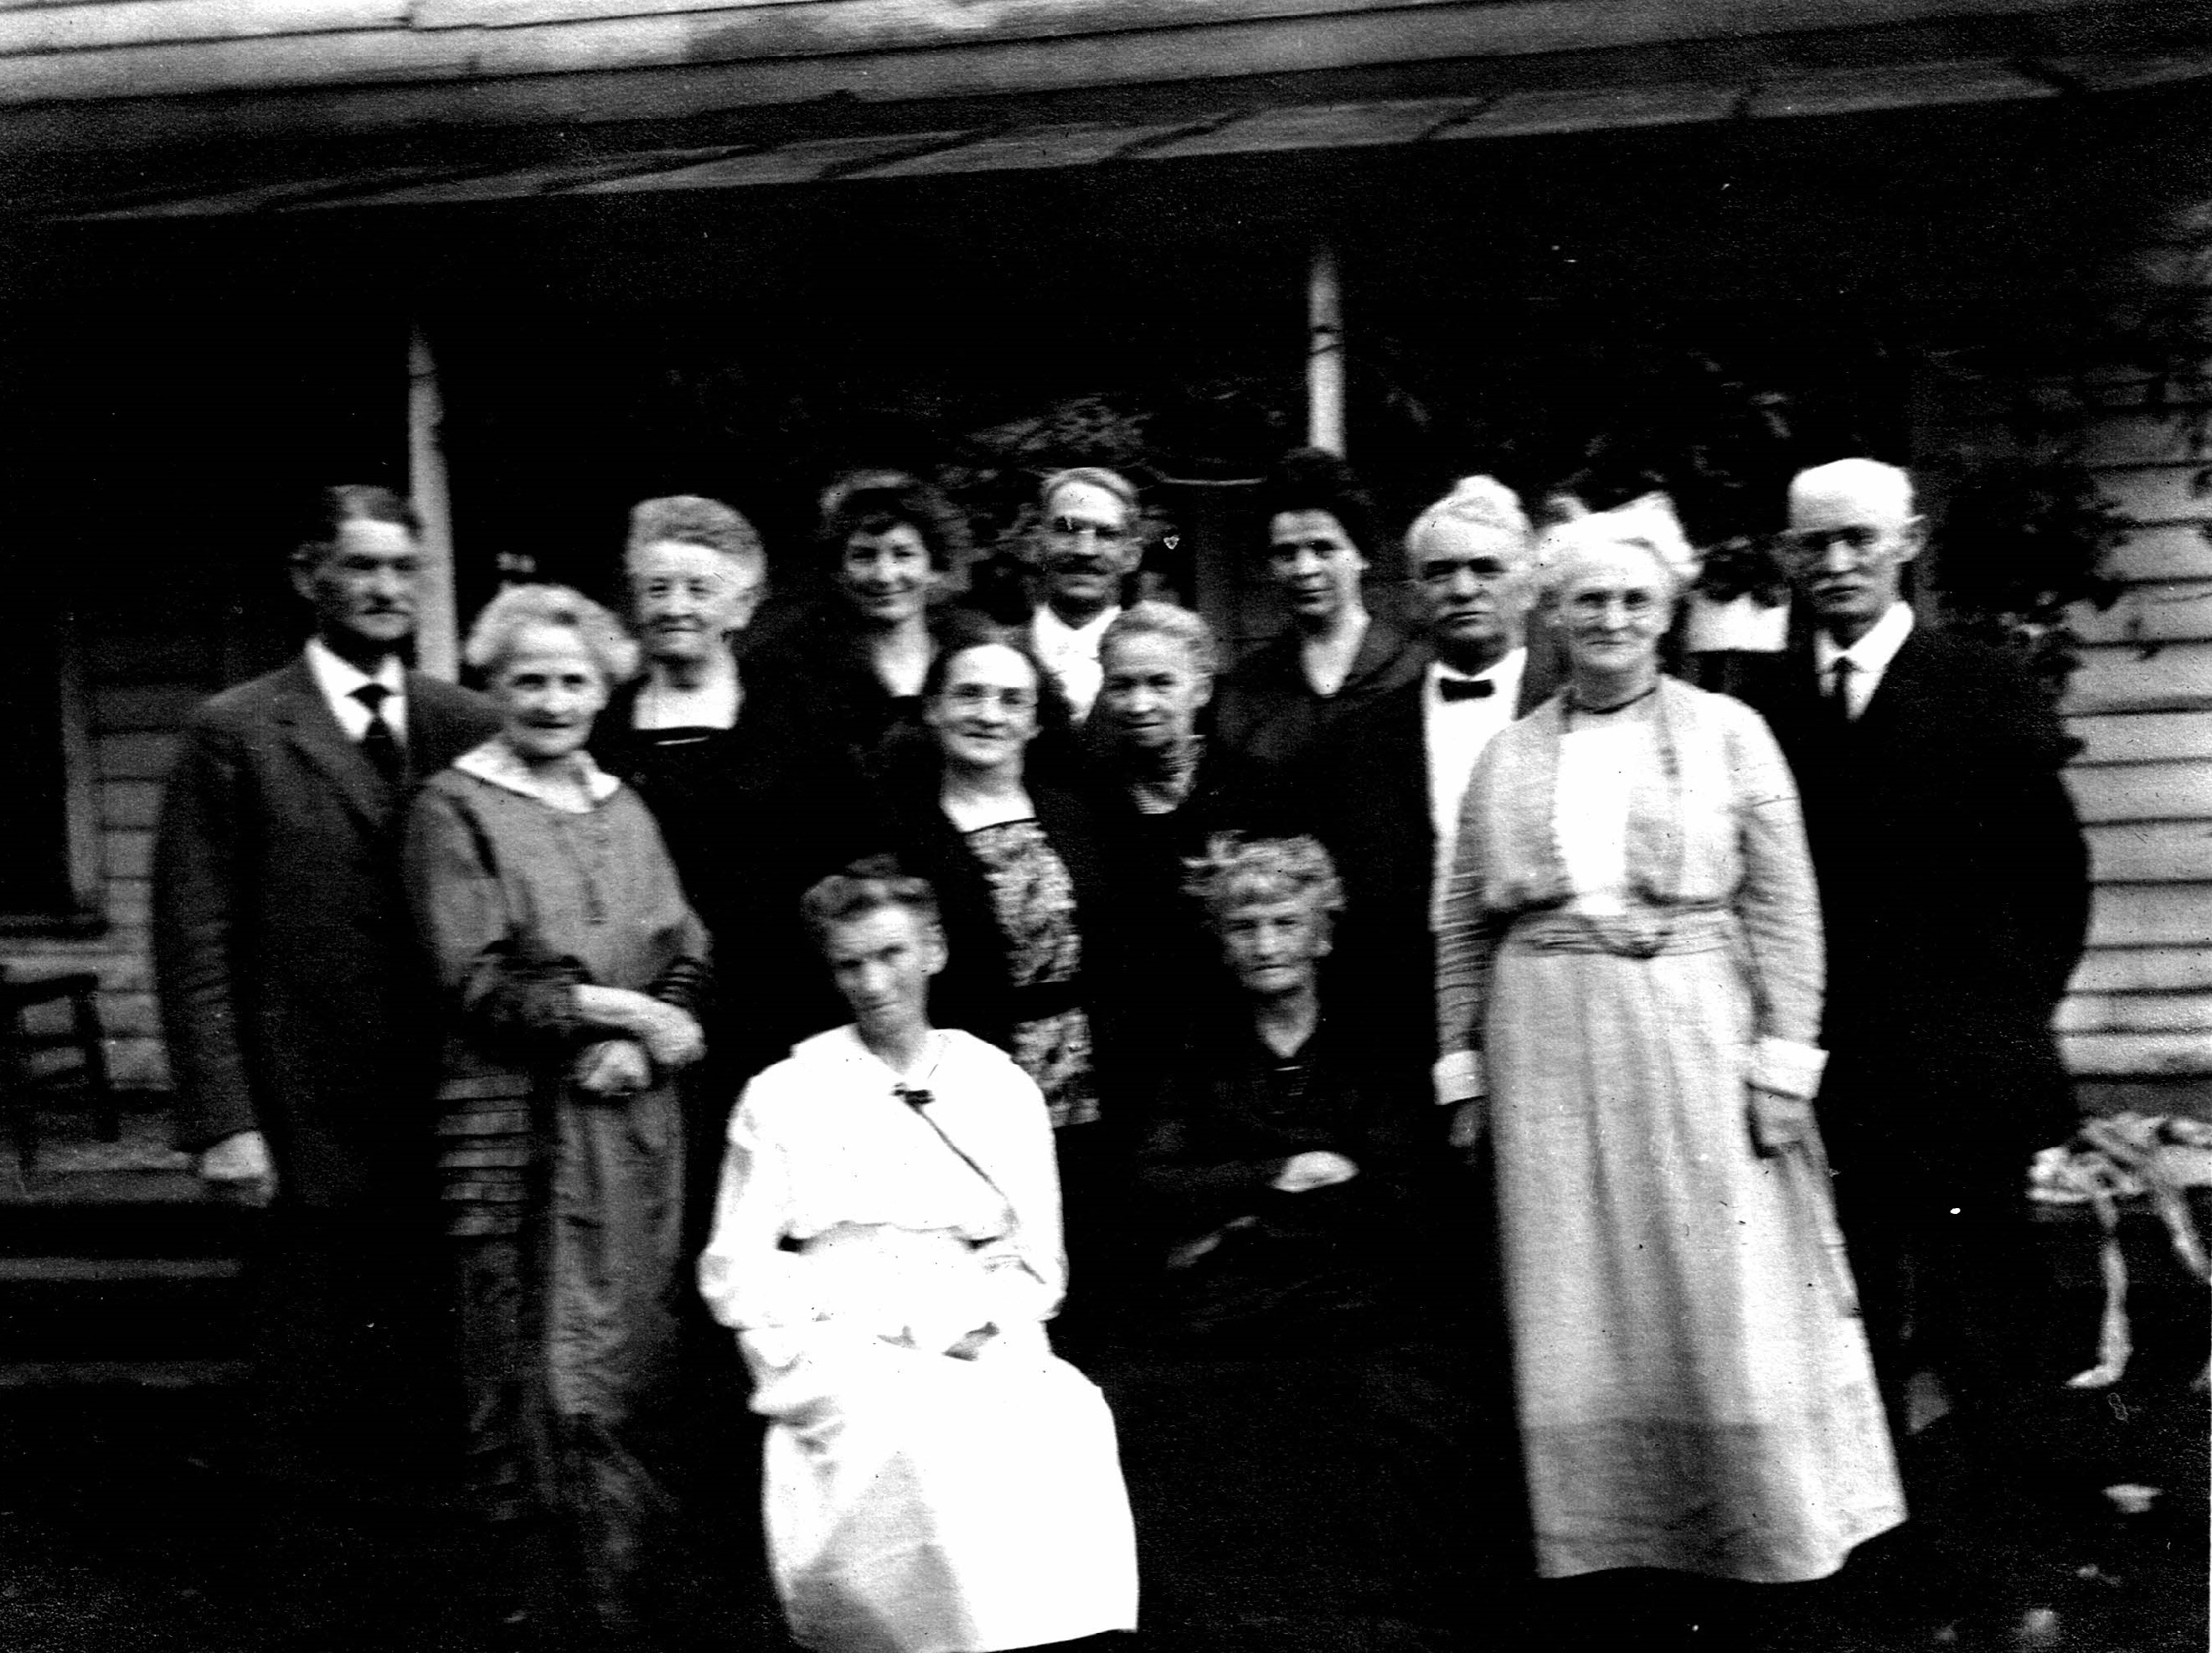 Photo 3 Some descendants of siblings Wm. Campbell, Sarah CAMPBELL Congdon. Mary Ann CAMPBELL Seely, Eleanor CAMPBELL Bosard, and Maria CAMPBELL Loop